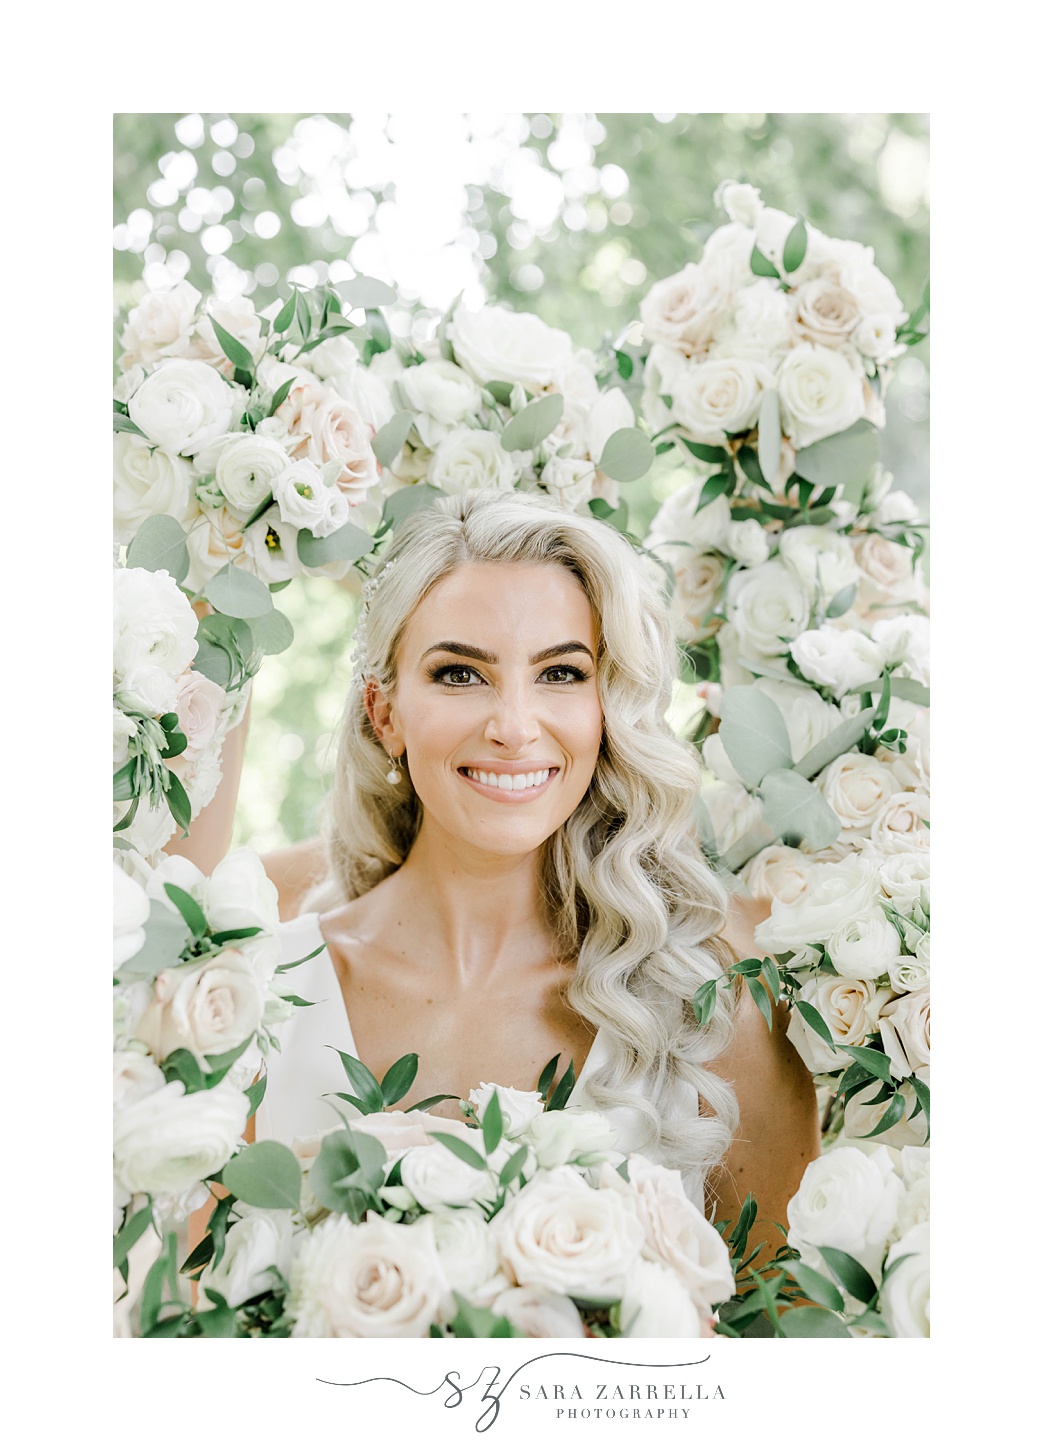 bride smiles in frame created by bridesmaids' bouquets